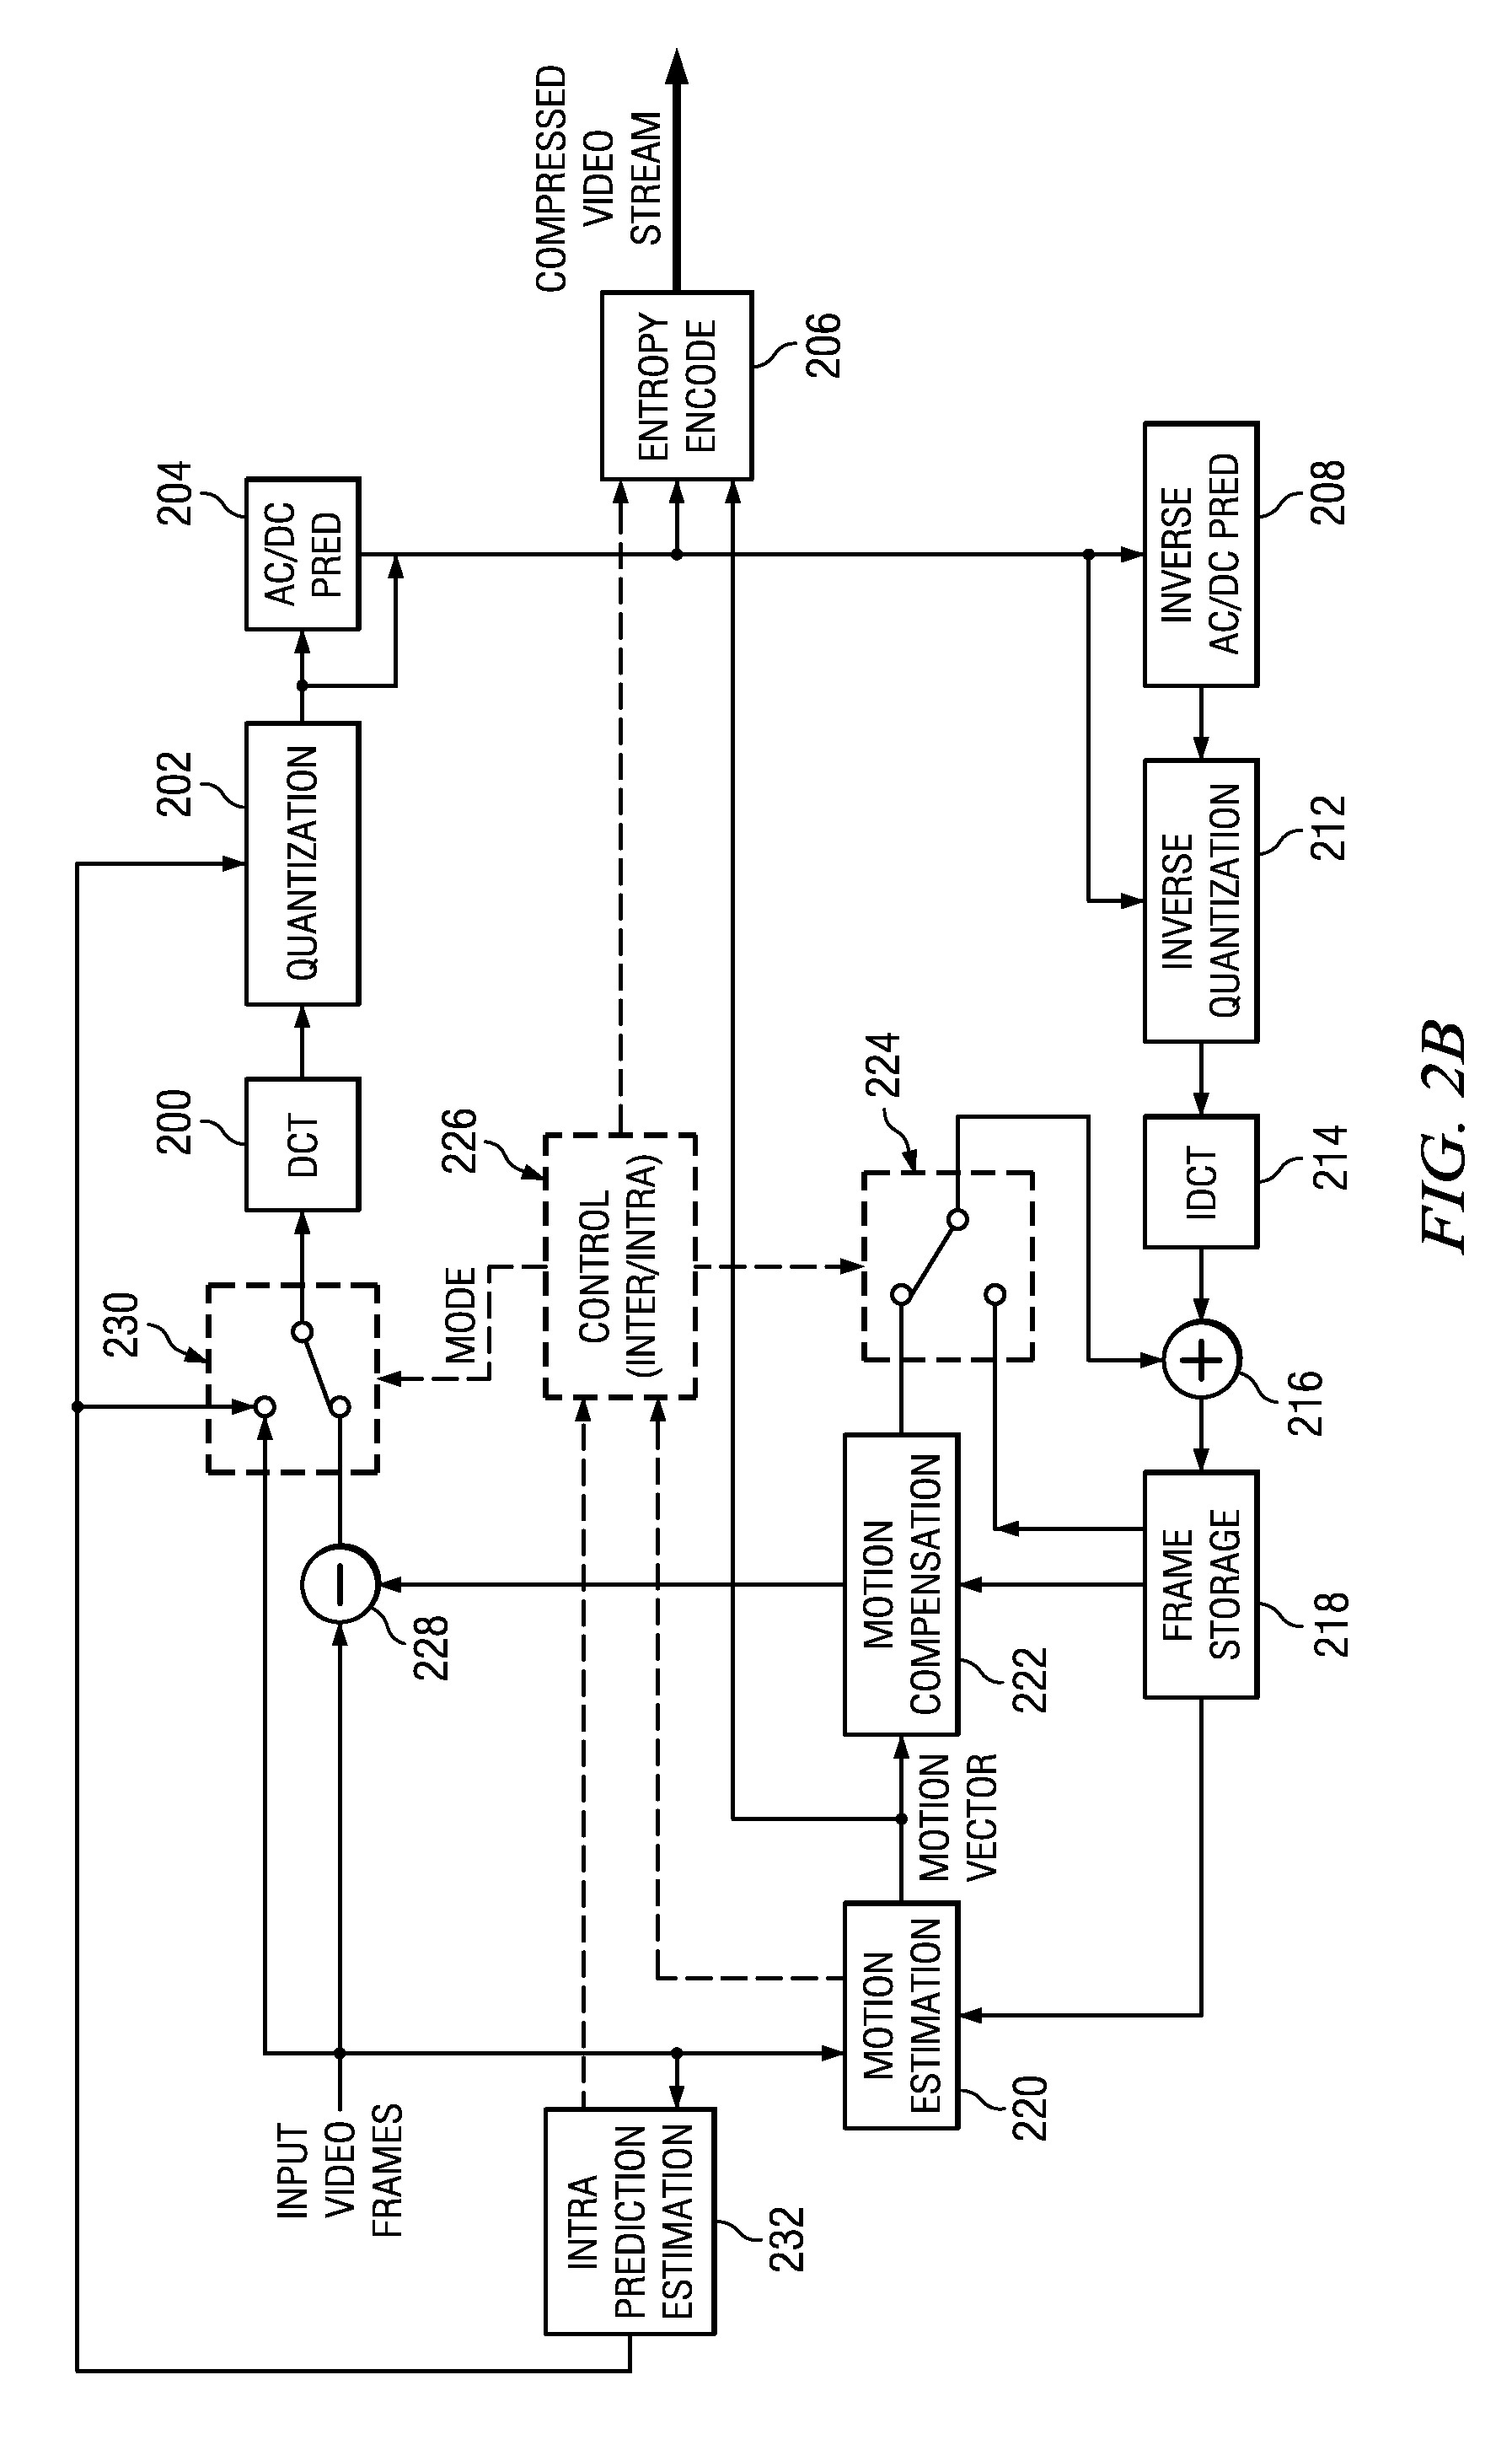 Method and System for Low Complexity Adaptive Quantization